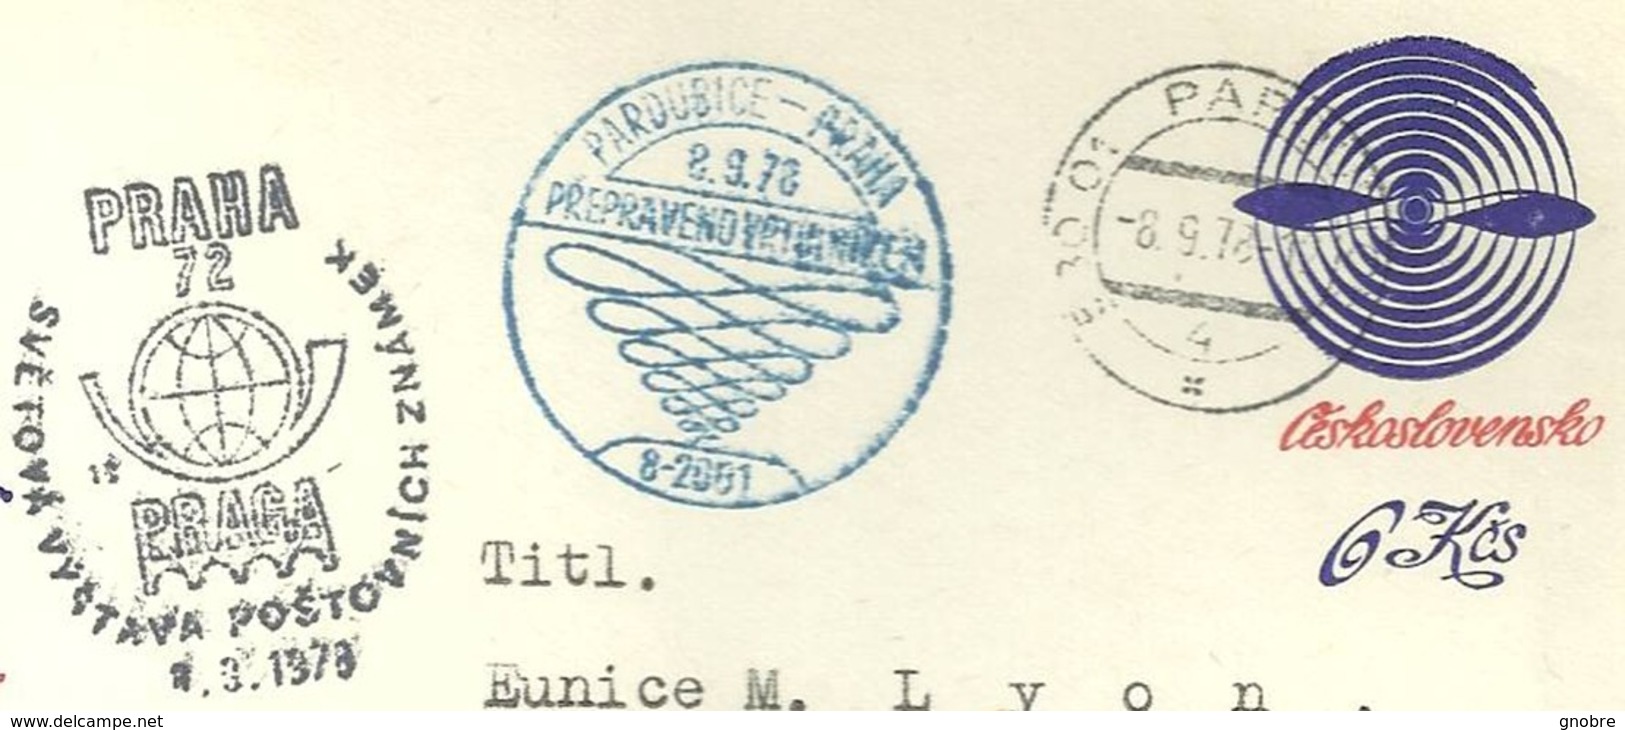 CZECHOSLOVAKIA To USA Cover Prepaid Stationery Sent In 1978 - Great Cancel - Woman Helicopter (GN 0278) - Buste